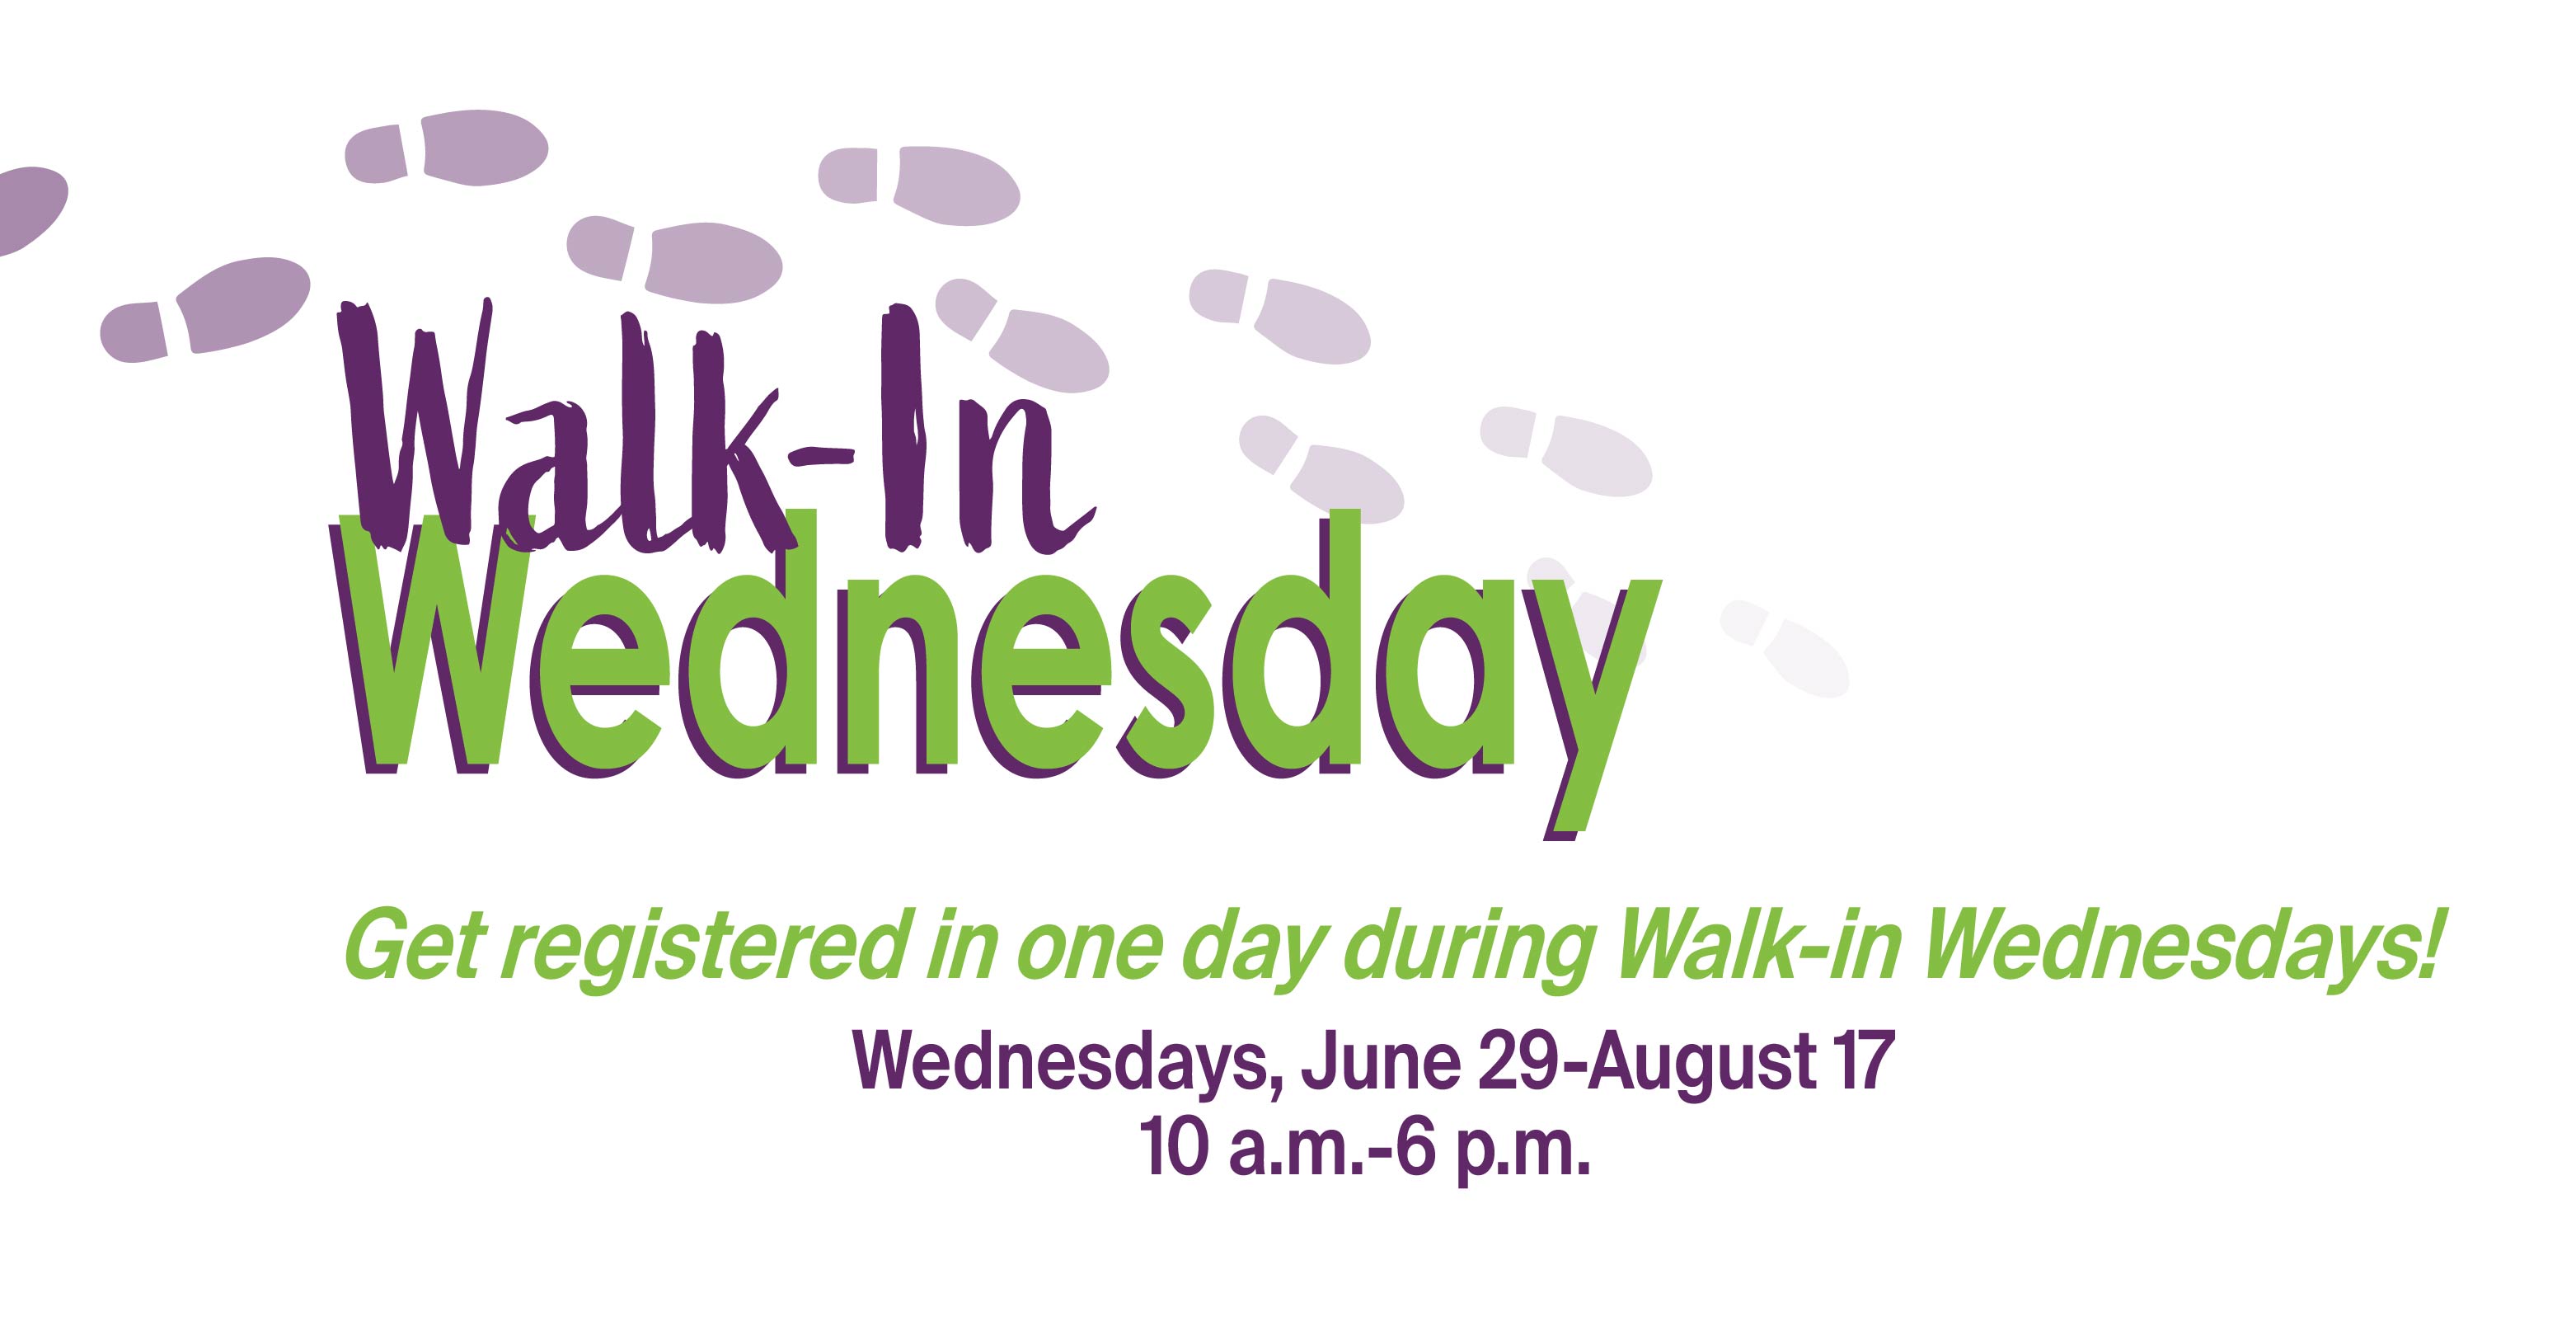 Get registered in one day during Walk-in Wednesdays!